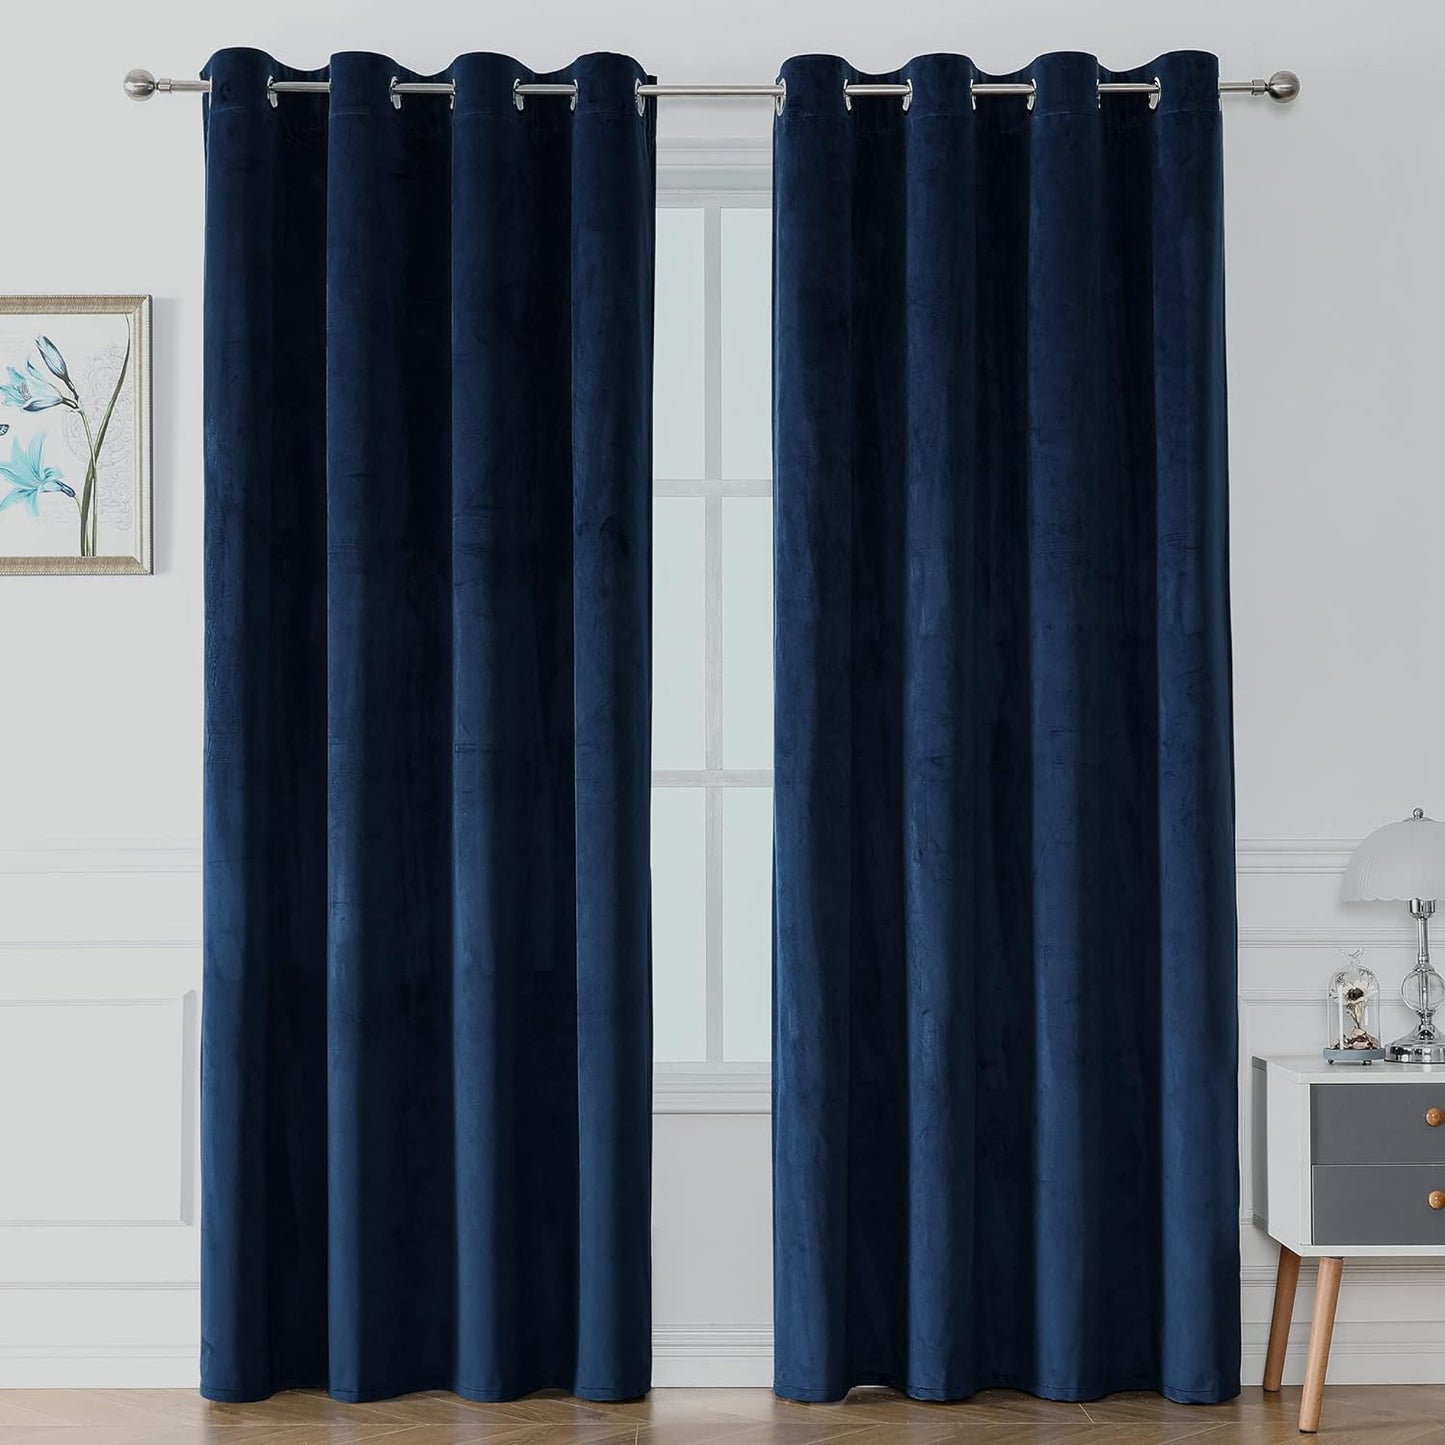 Victree Velvet Curtains for Bedroom, Blackout Curtains 52 X 84 Inch Length - Room Darkening Sun Light Blocking Grommet Window Drapes for Living Room, 2 Panels, Navy  Victree Navy 52 X 96 Inches 